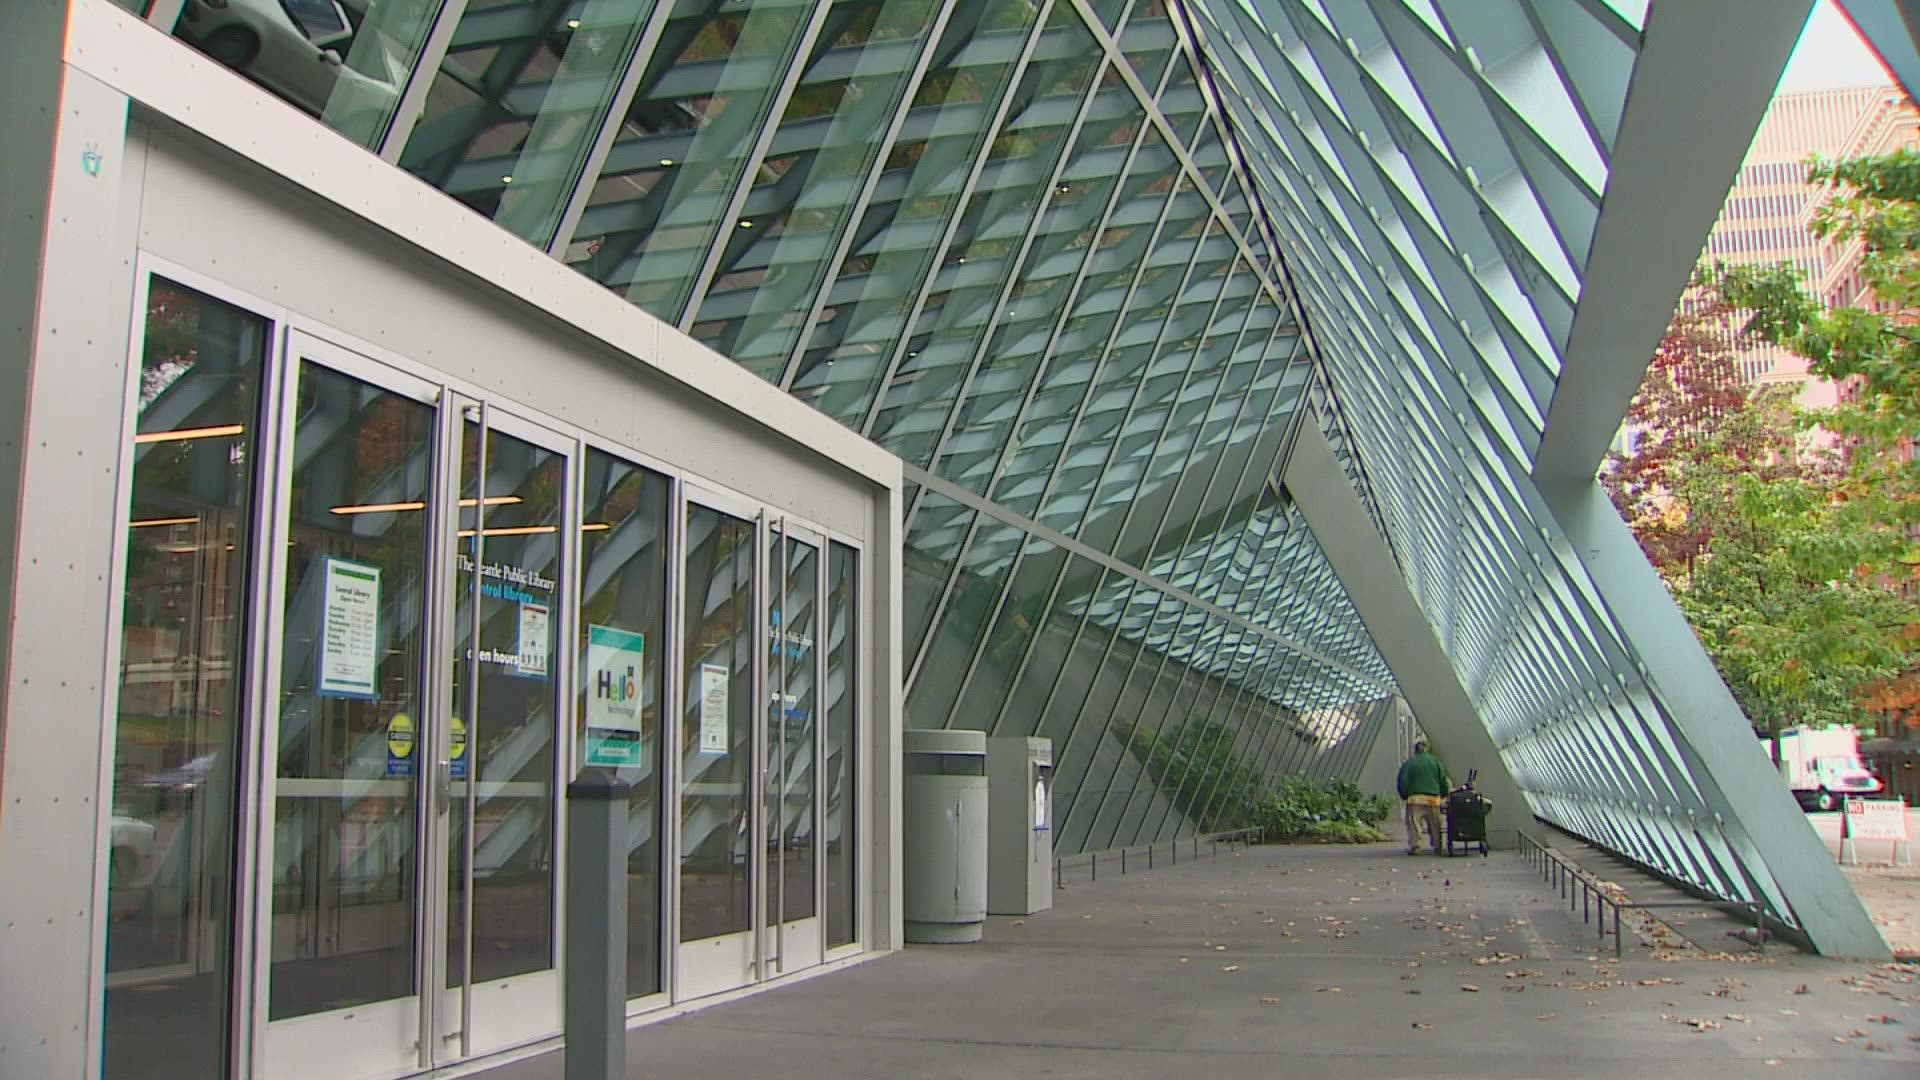 The Seattle Public Library is seeing an increase in loitering and vandalism across all its branches, with the Central Library downtown costing the most in damages.